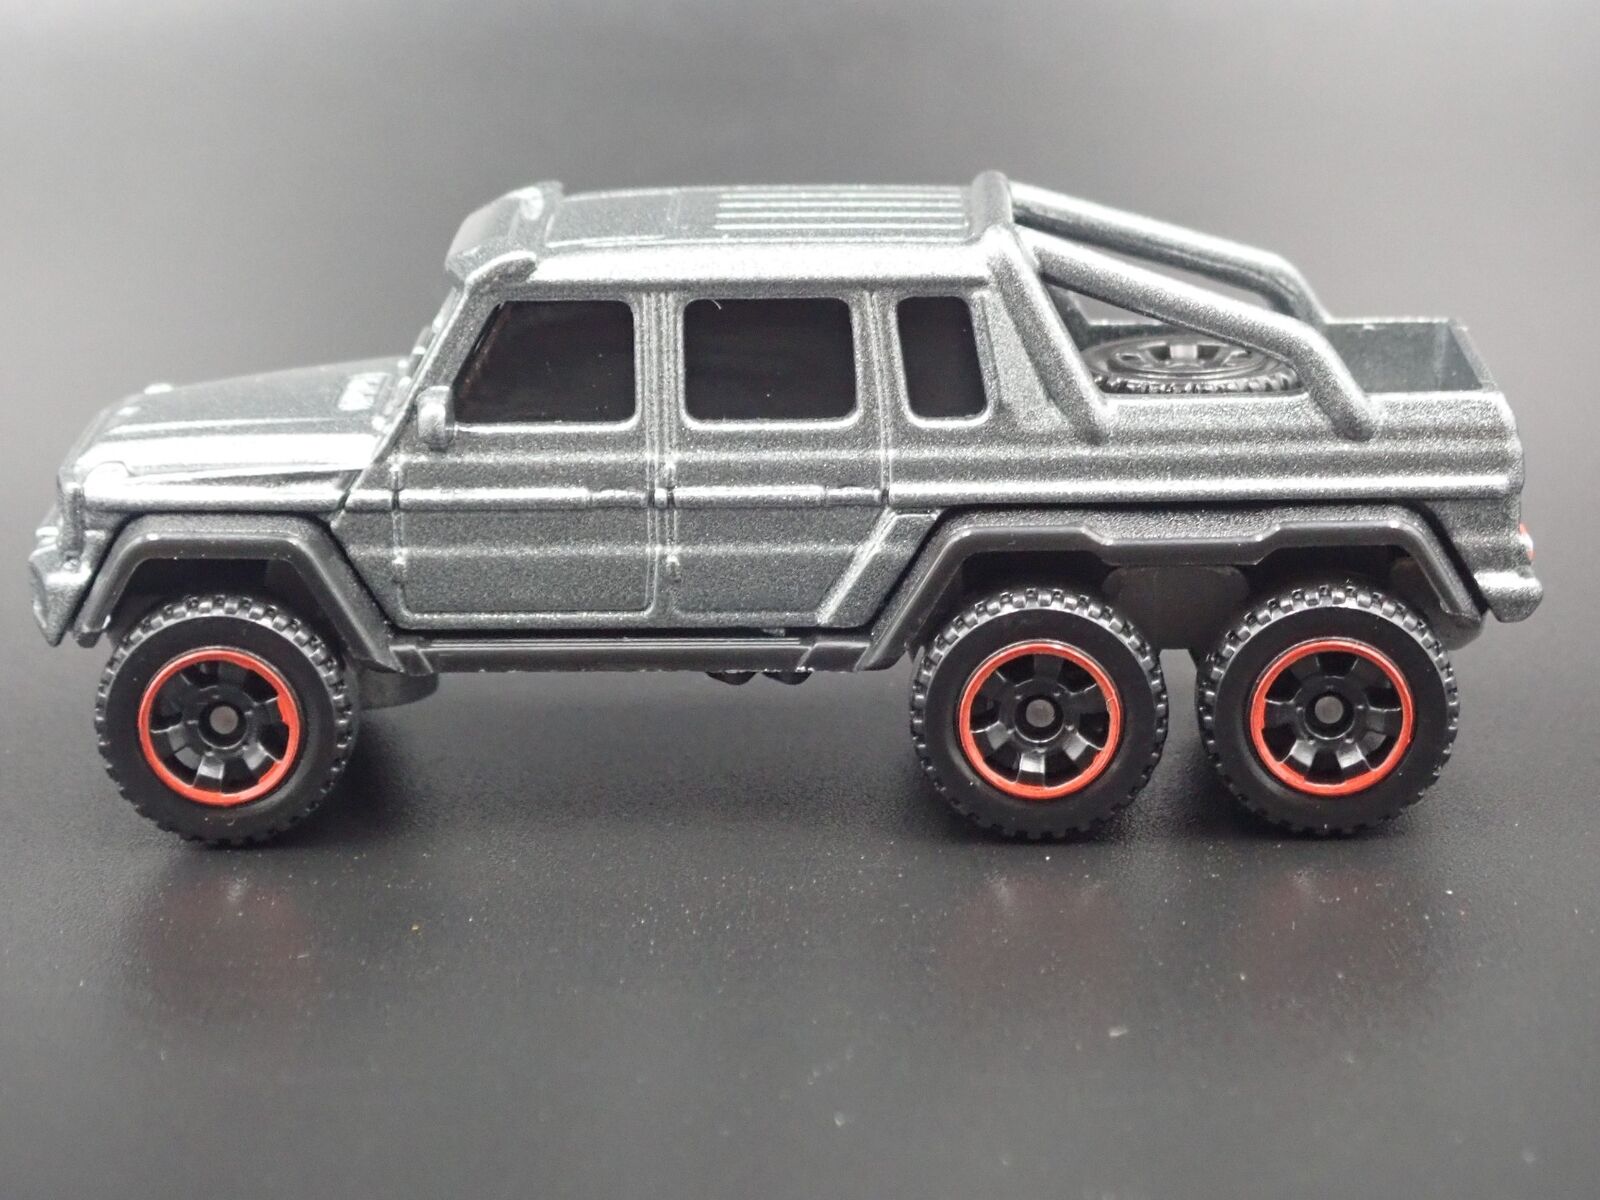 2013-2015 MERCEDES-BENZ G63 AMG 6X6 G WAGON RARE 1:59 SCALE DIECAST relisted